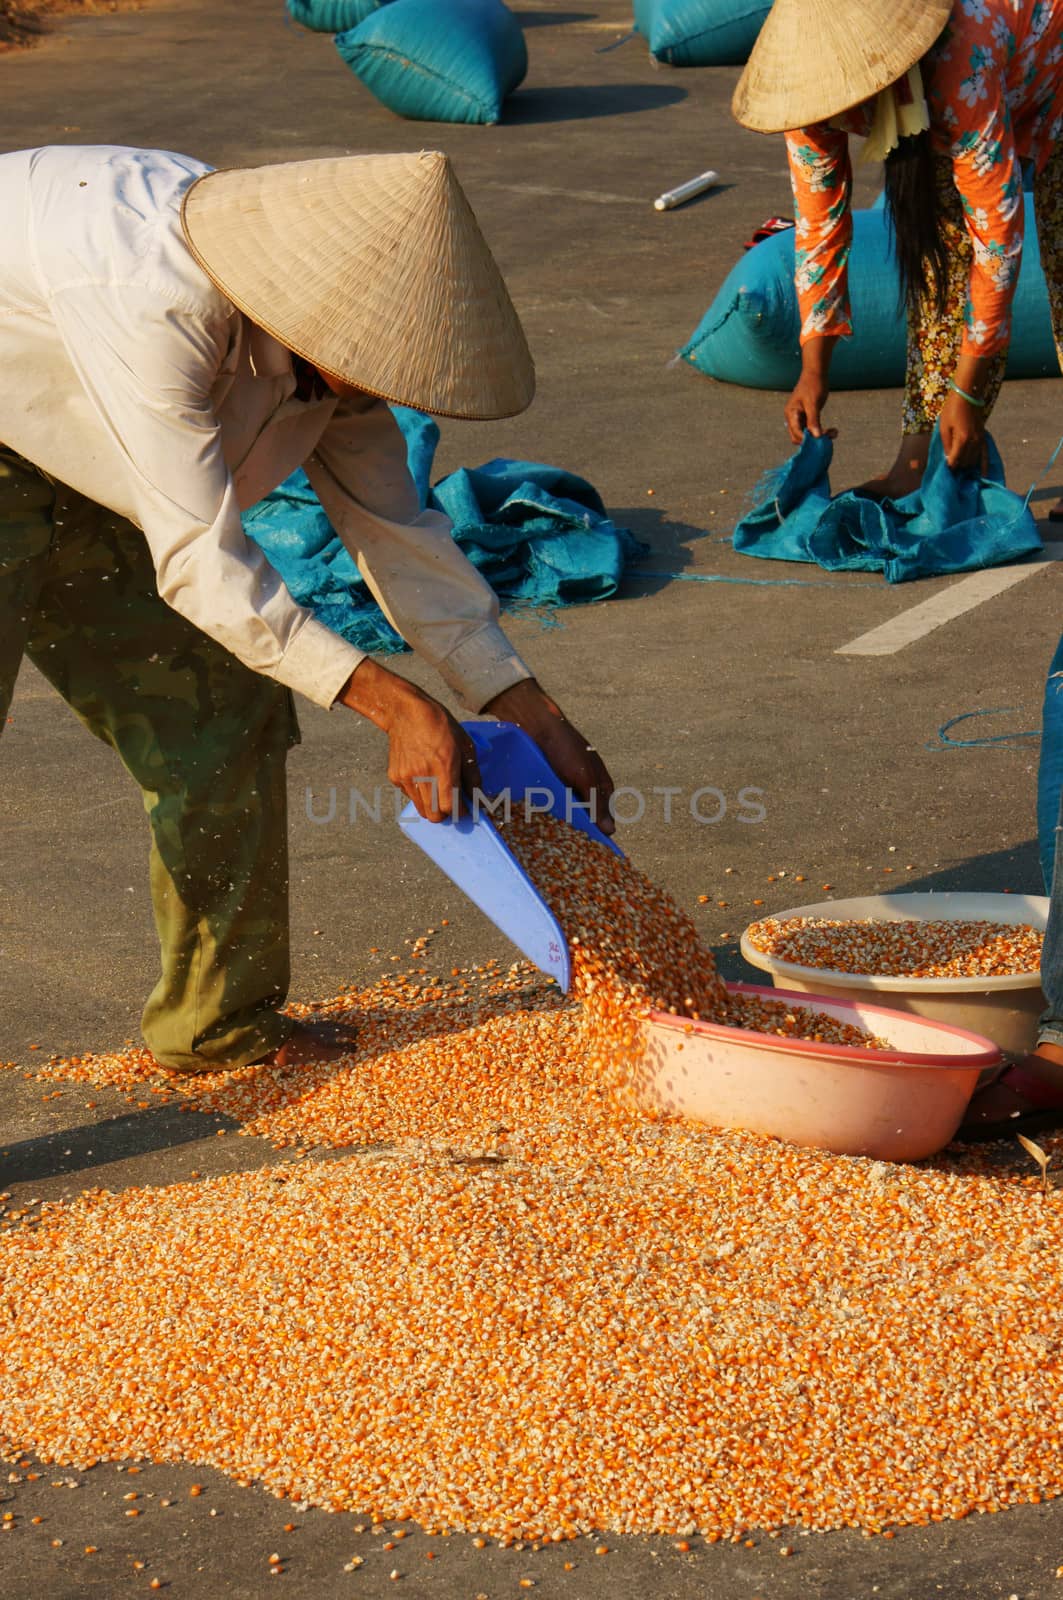  DAKLAK, VIETNAM- FEB 6: People collect maize of a good crop after dry corn on drying ground , yellow corn kernel dried ready for foodstuff pruduce , Viet Nam, Feb 6, 2014                           